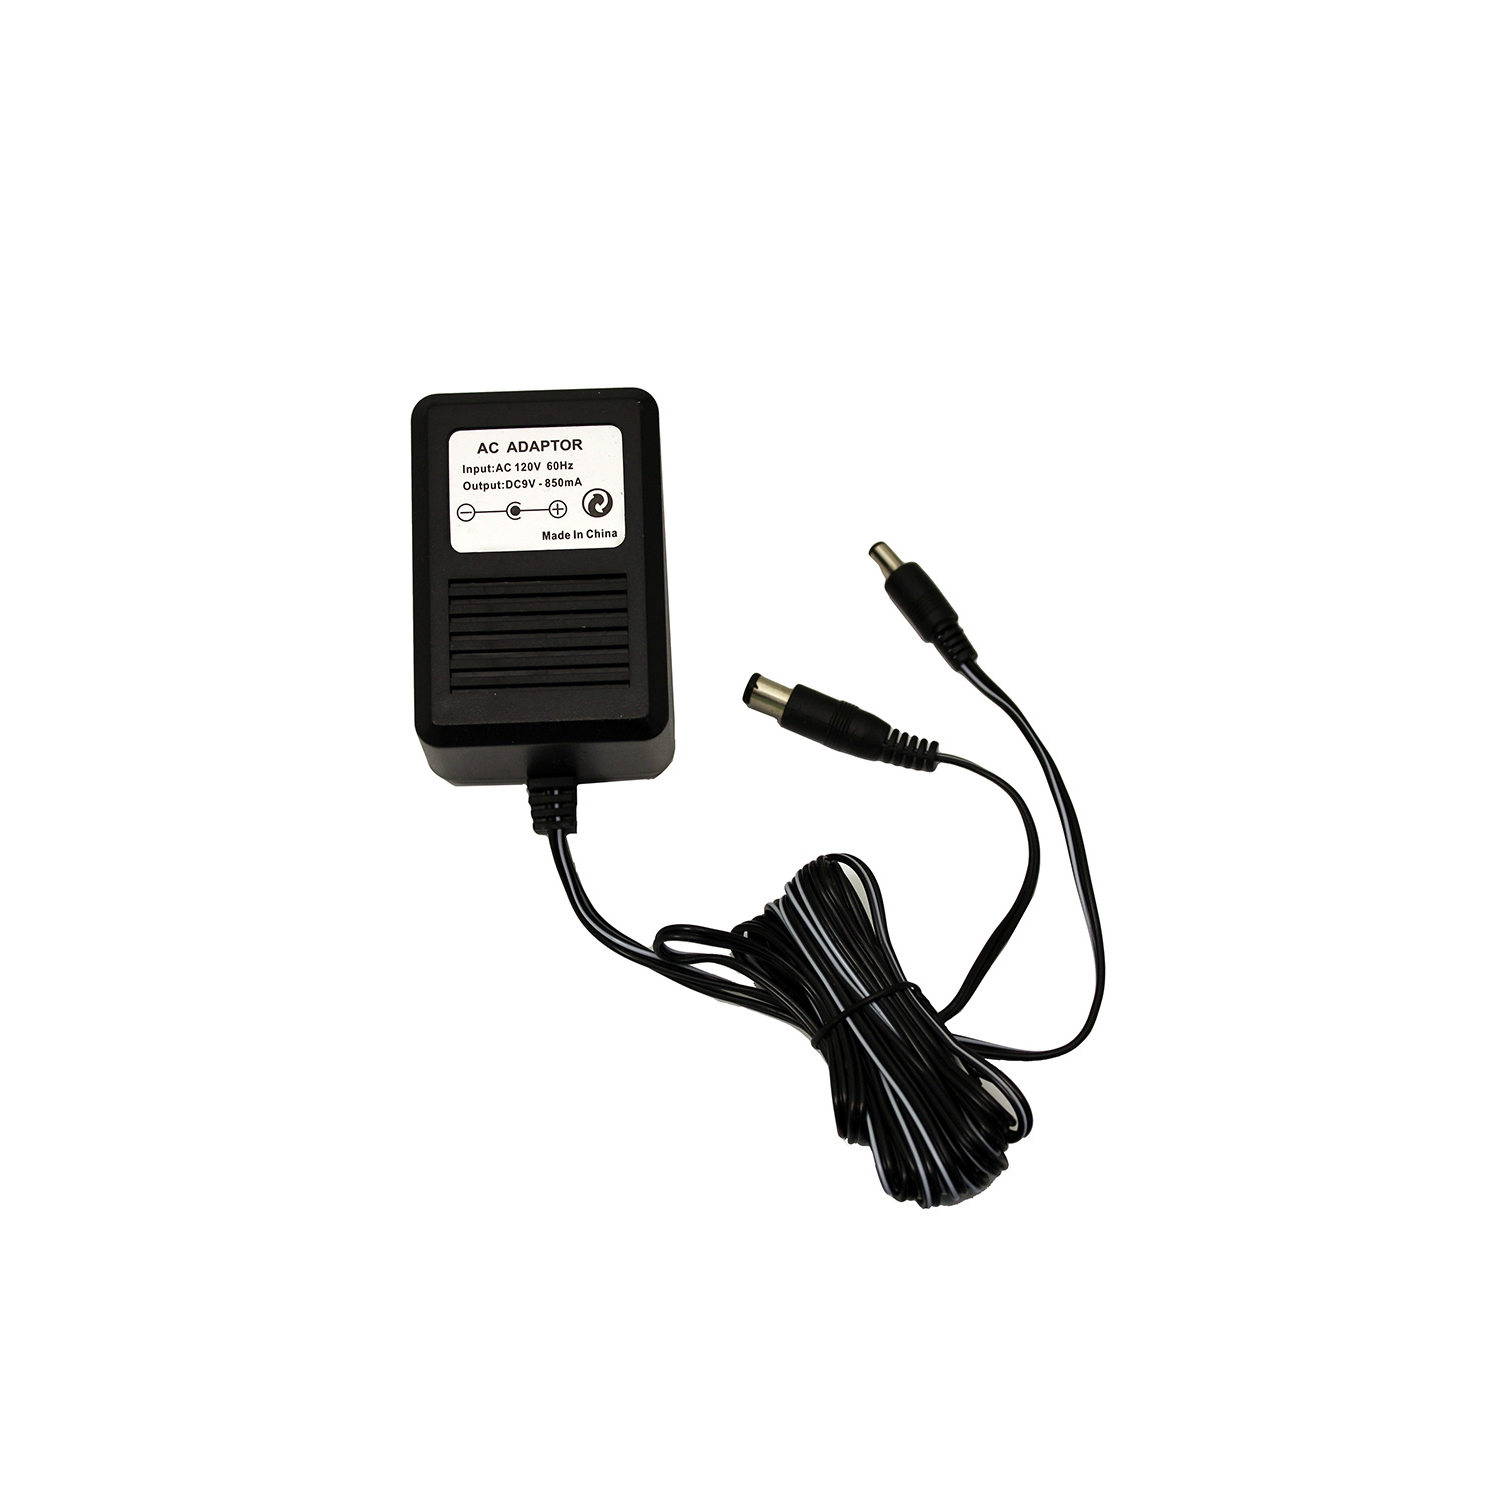 3-in-1 AC Power Adapter for NES, SNES, and Sega Genesis 1 - by Mars Devices